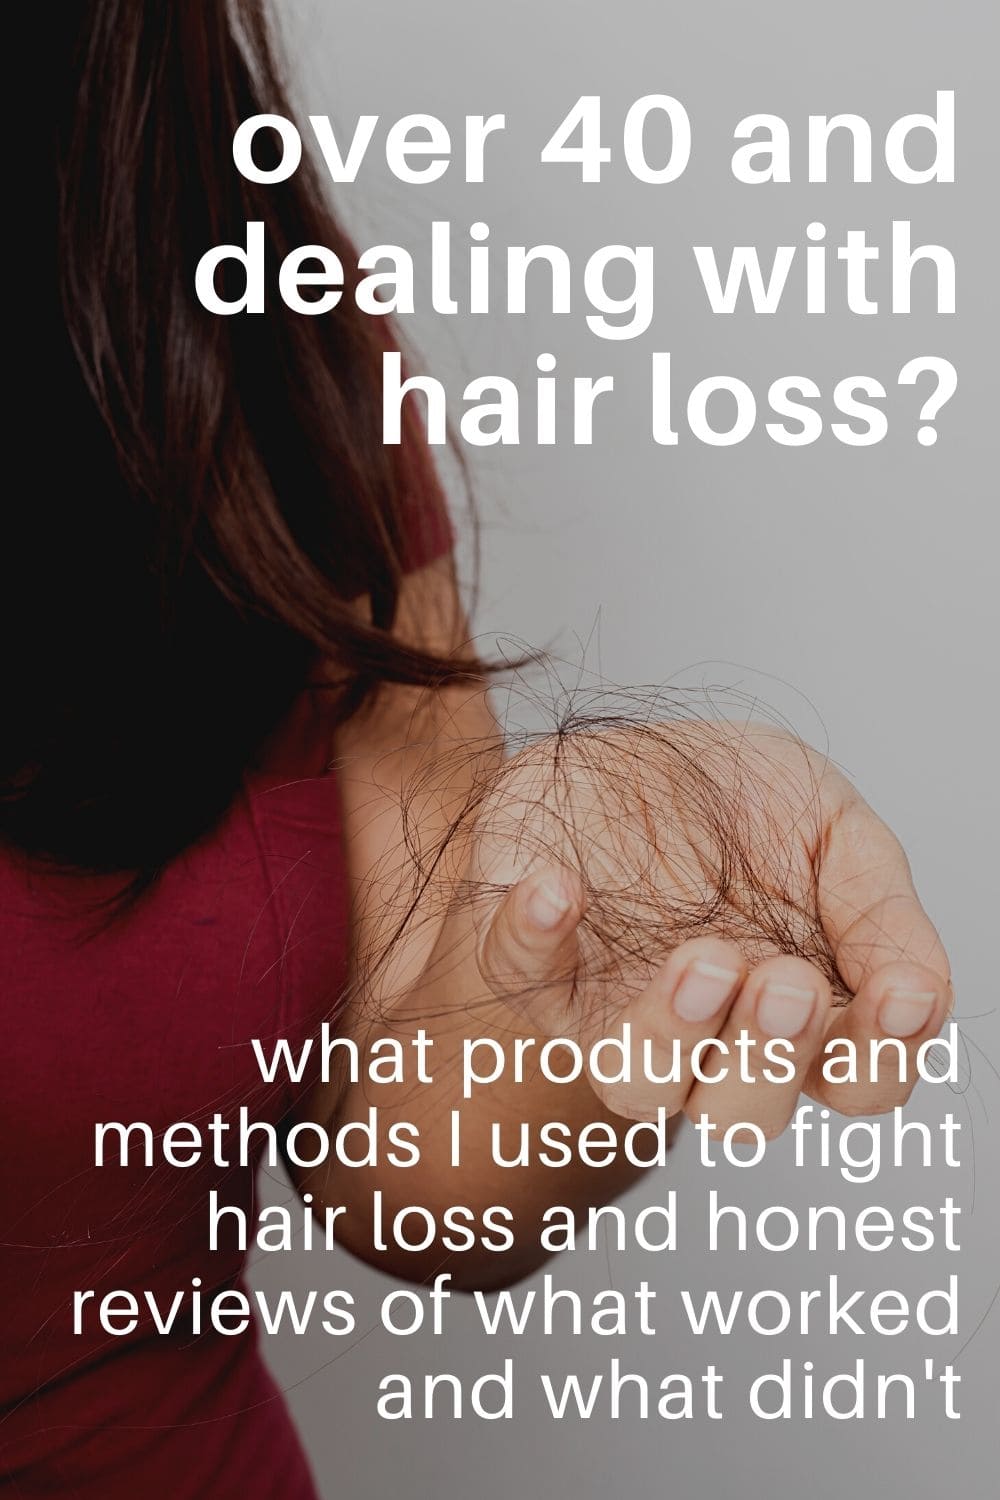 Tips to Fight Hair Loss When Over 40